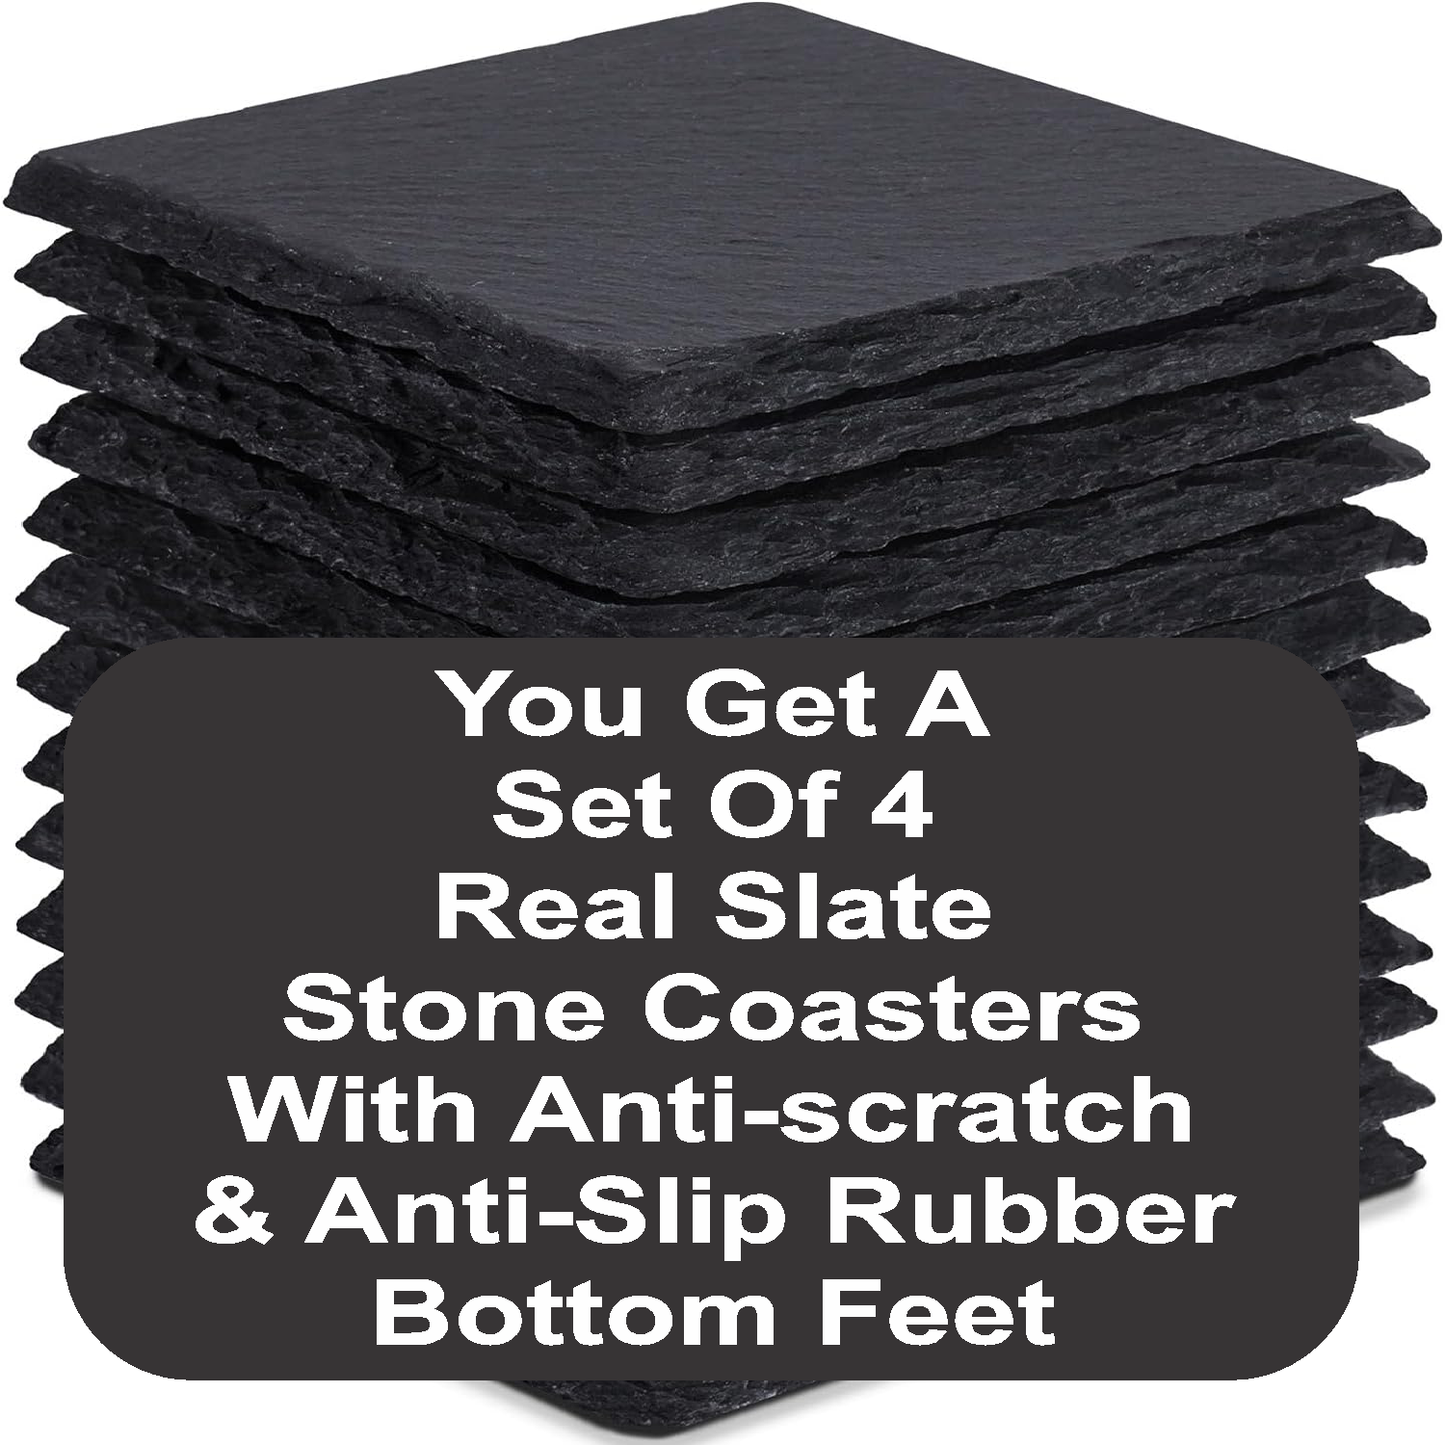 Park Beer Right Here - Set of 4 Black Slate Stone Coasters